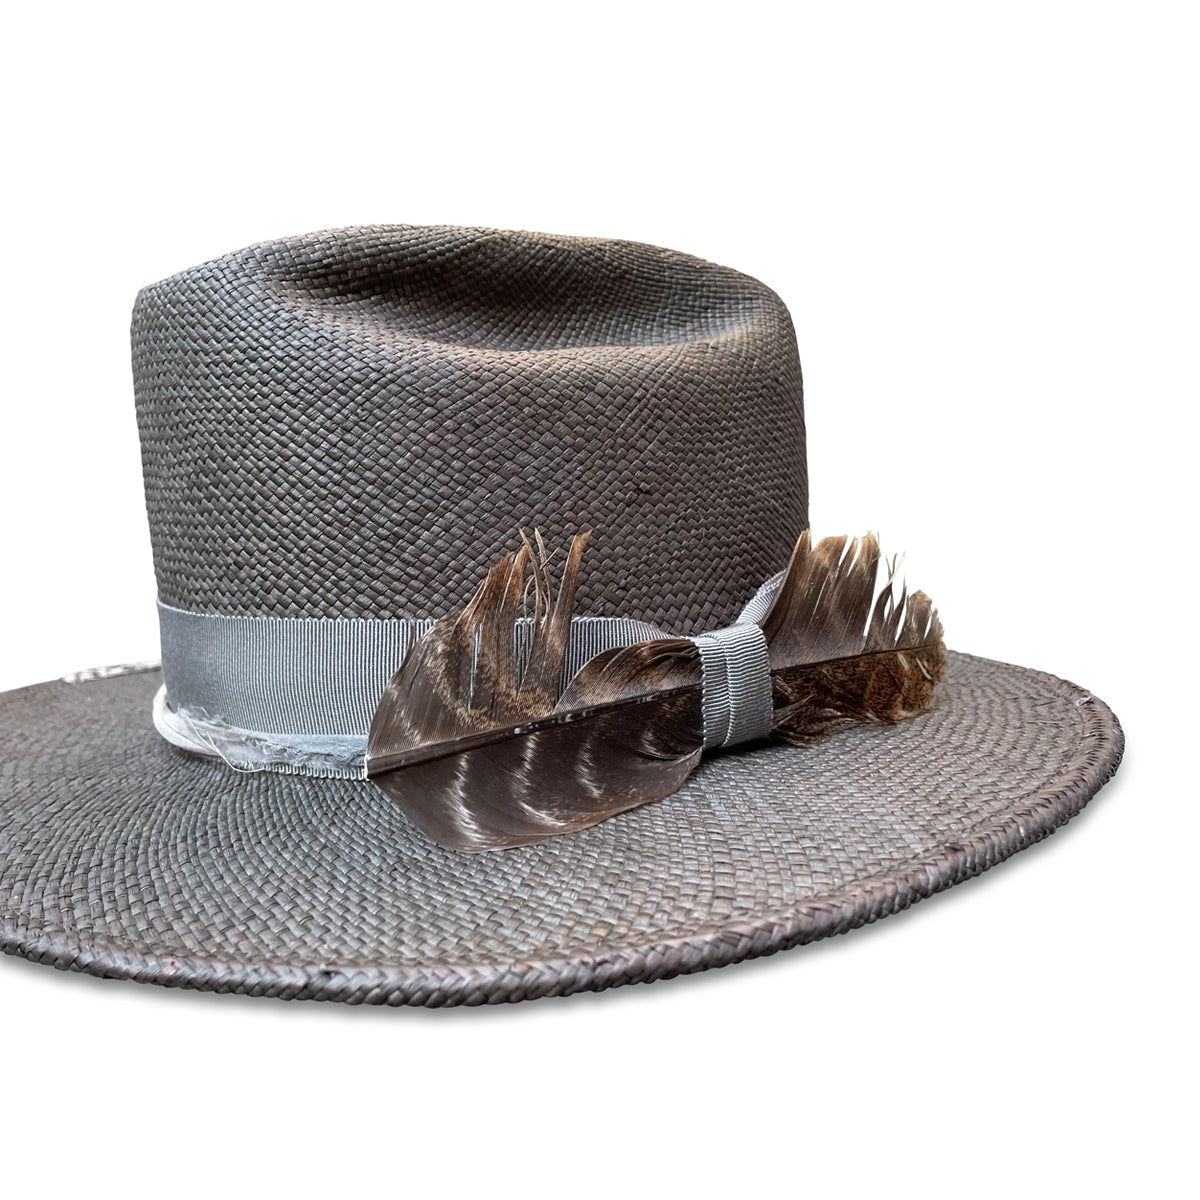 Unique hybrid-style straw cowboy hat with recycled silk and turkey feather detailing, crafted by Cha Cha's House of Ill Repute in NYC